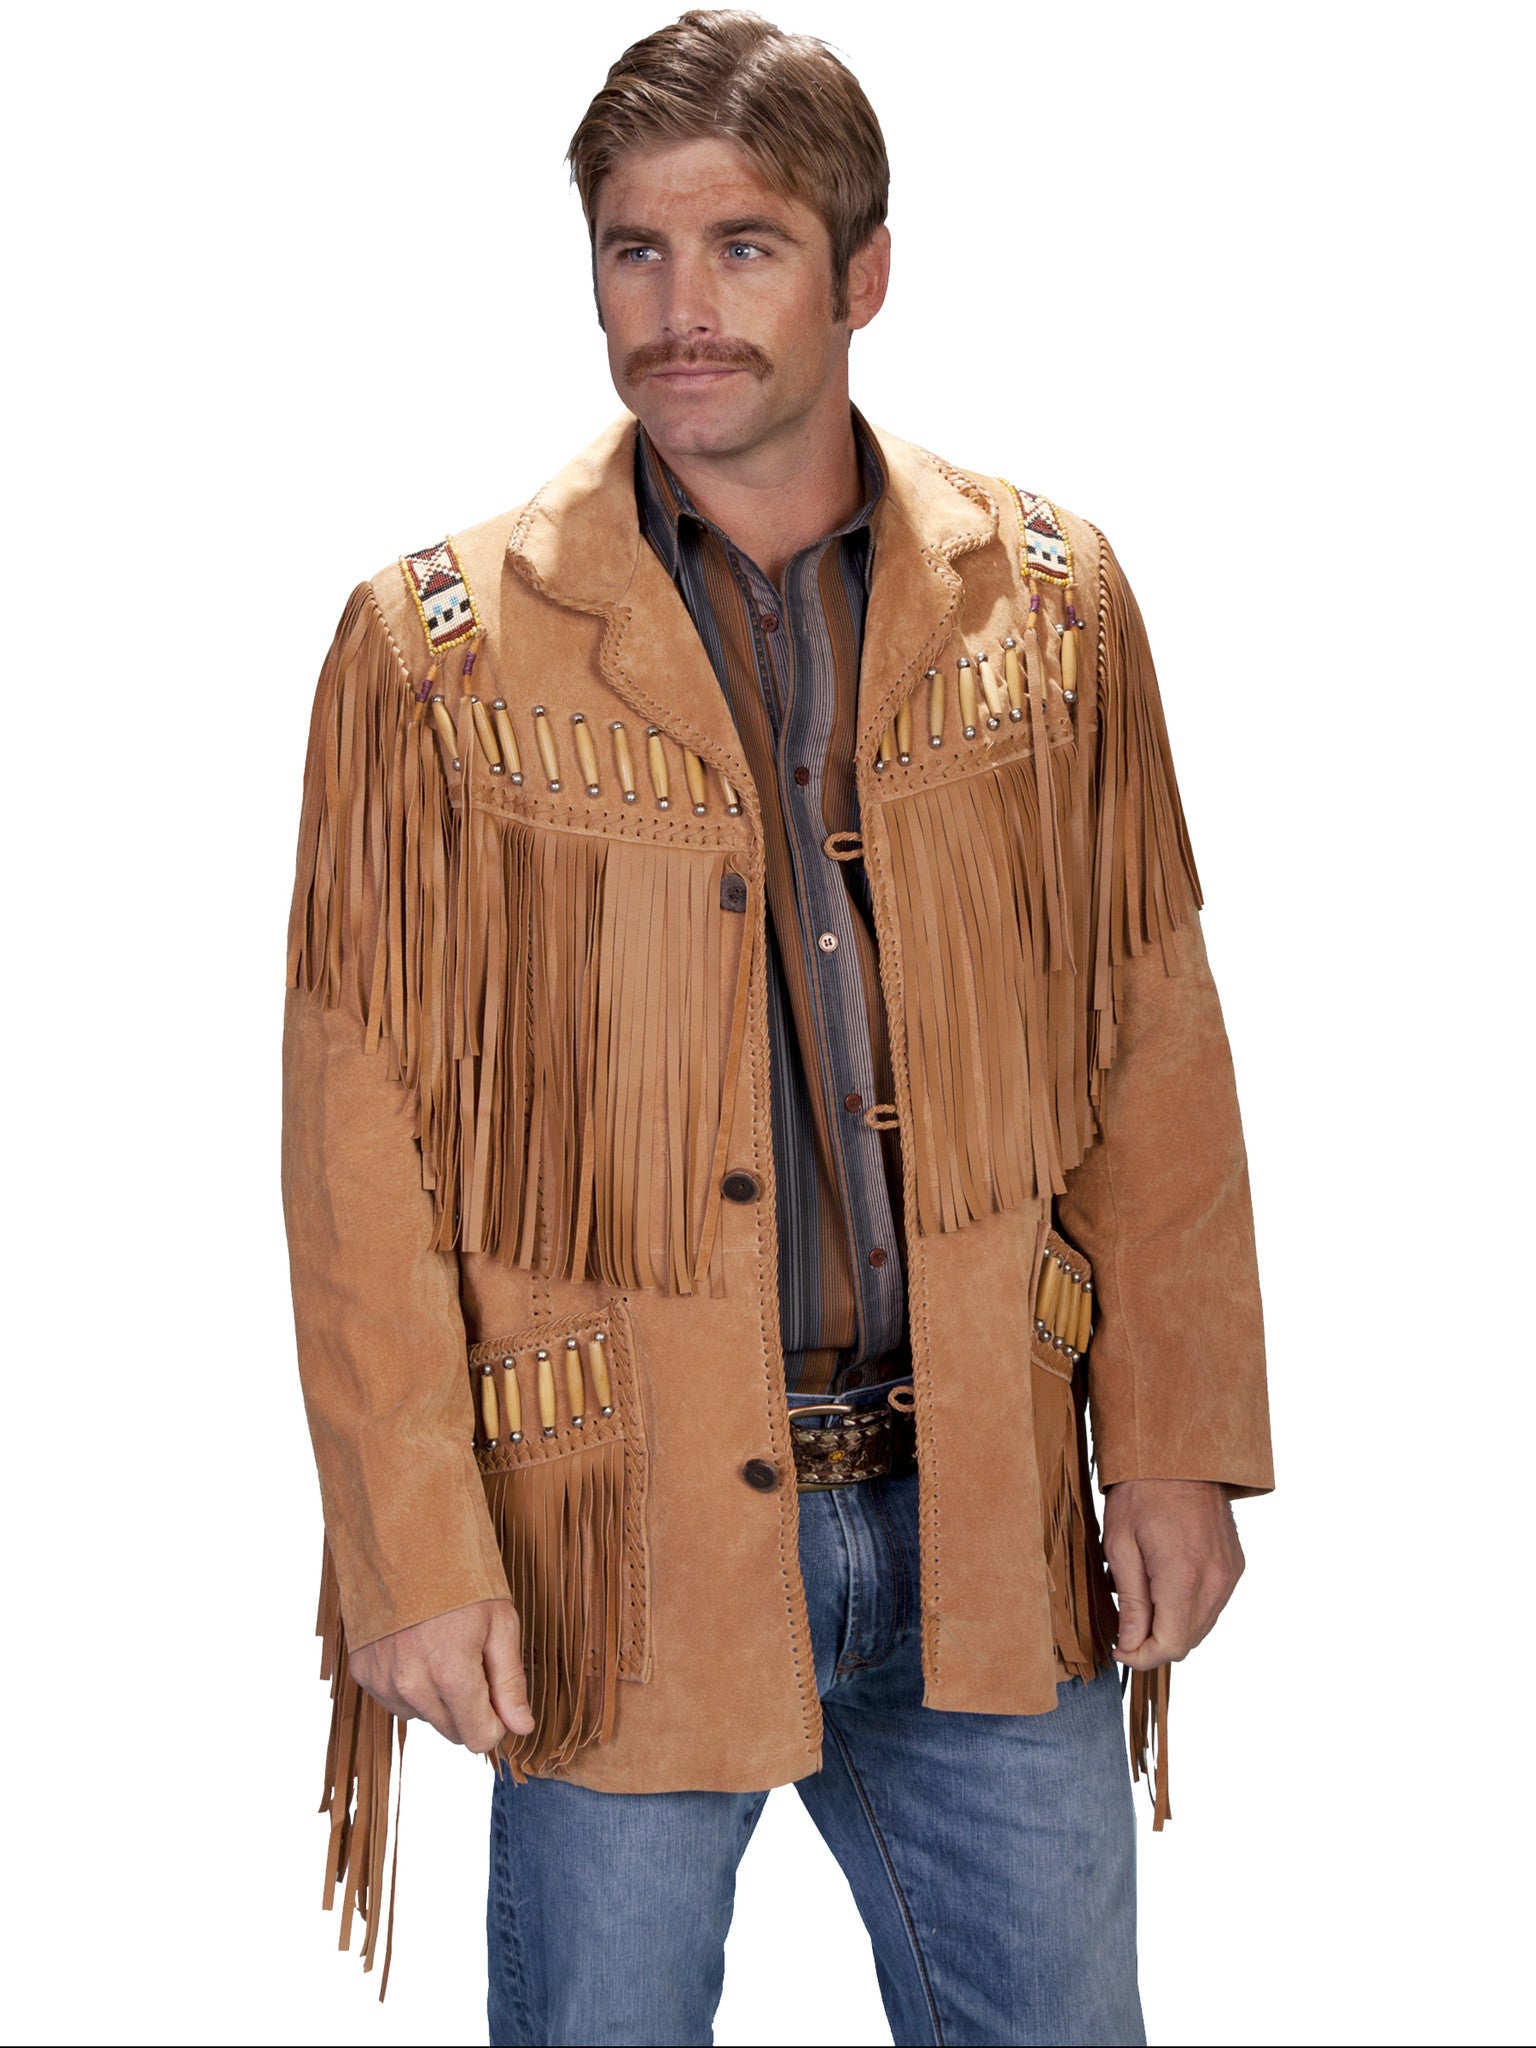 Scully Mens Fringe, Beads, Epaulets Jacket, Golden Tan Front View